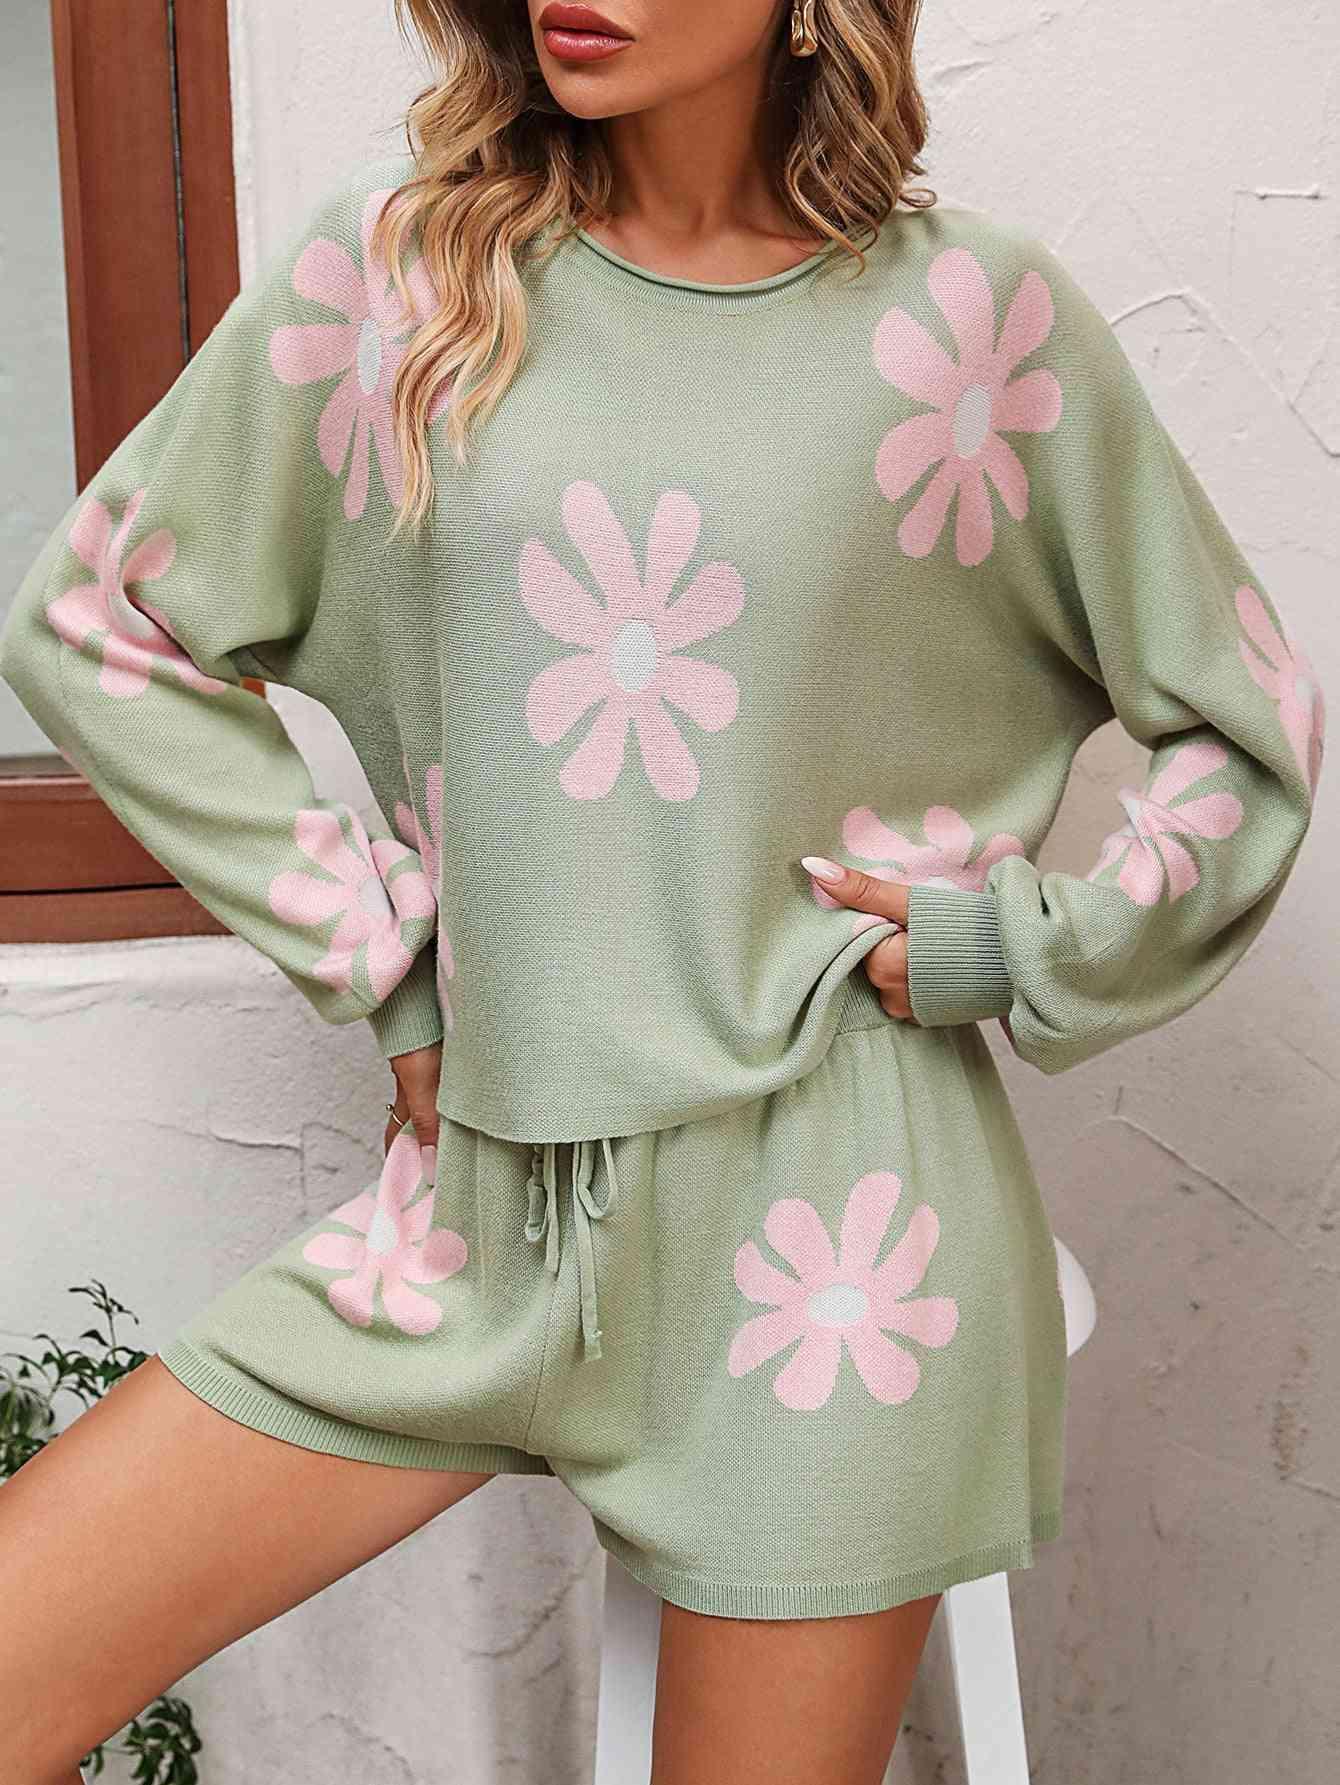 Longing For Spring Floral Knit Sweater and Shorts Set-MXSTUDIO.COM